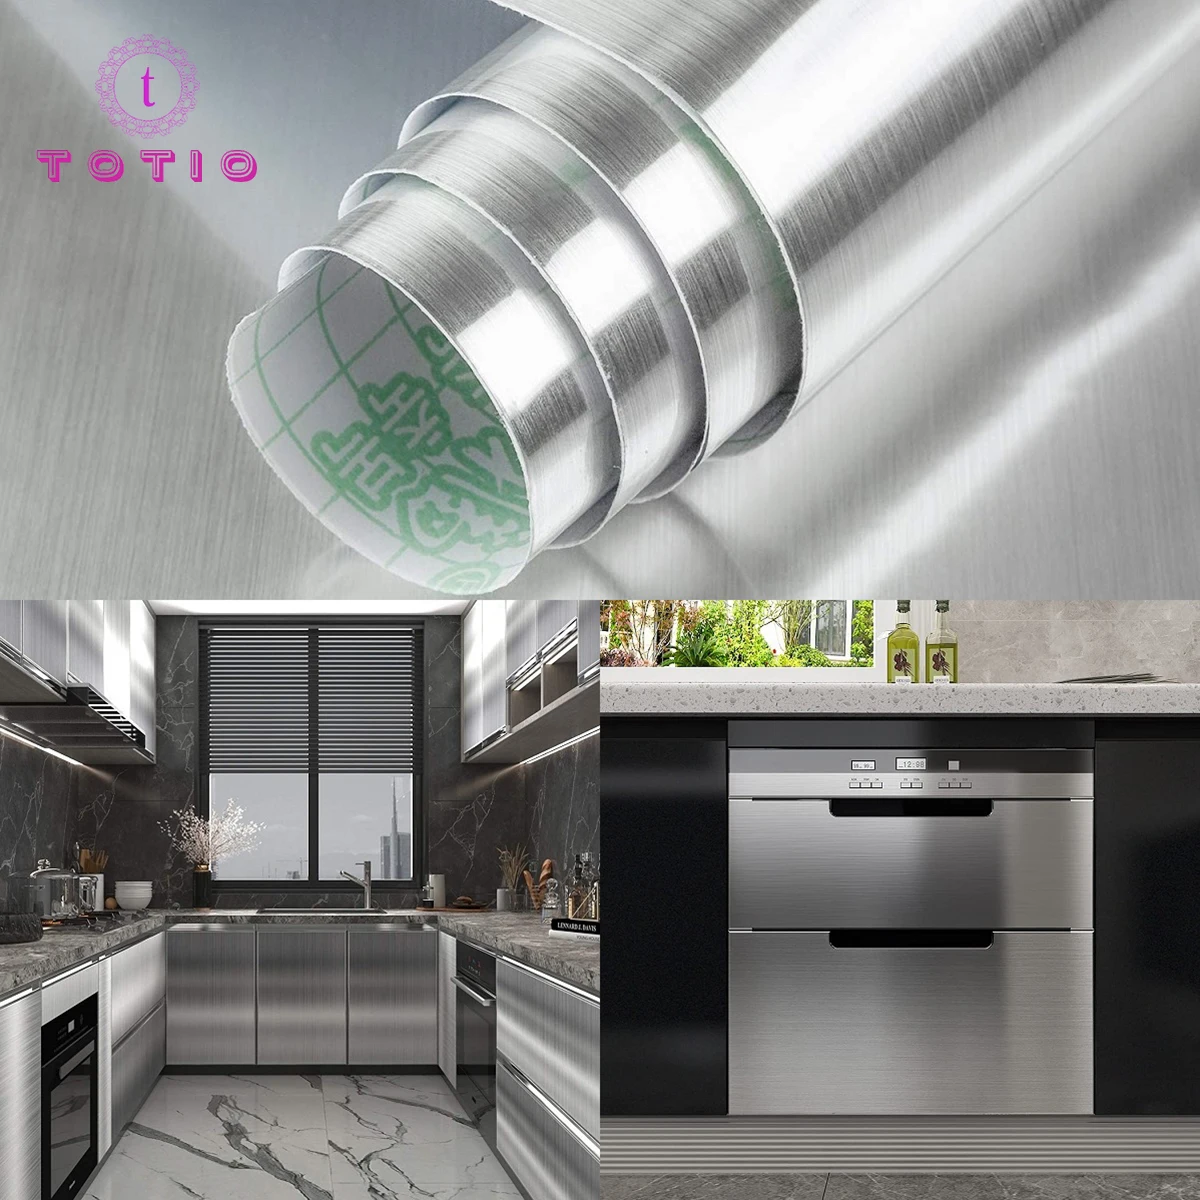 TOTIO Waterproof Silver Wallpaper Self Adhesive Stainless Steel Wallpaper Heat Resistance Vinyl Oilproof House Appliance Kitchen self adhesive stair mats 15 pcs silver 65x25 cm